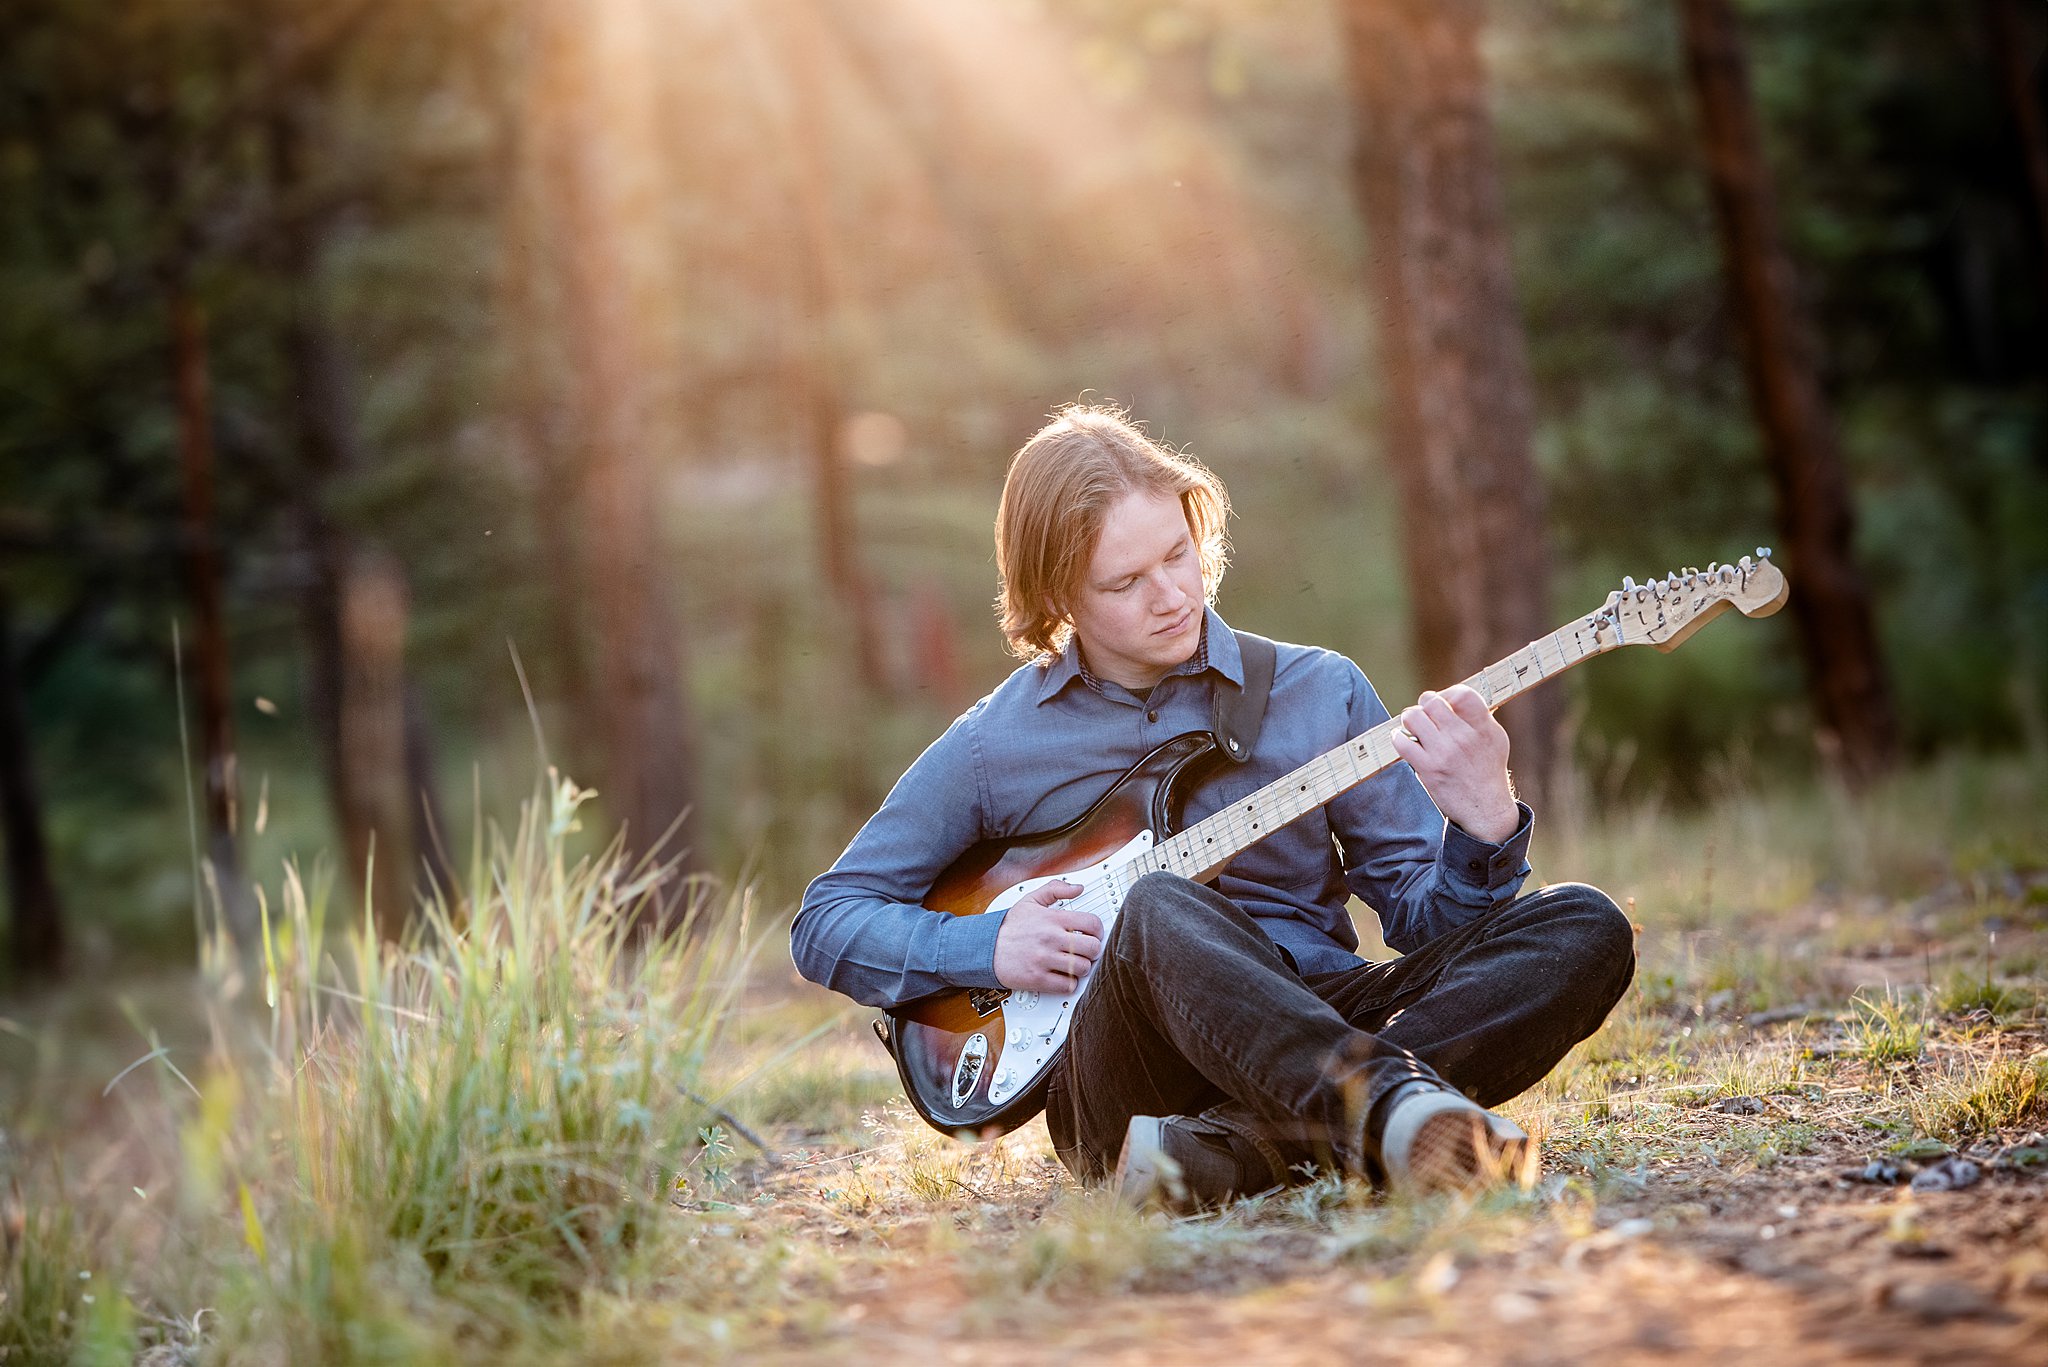 A high school senior plays a guitar while sitting in a forest at sunset